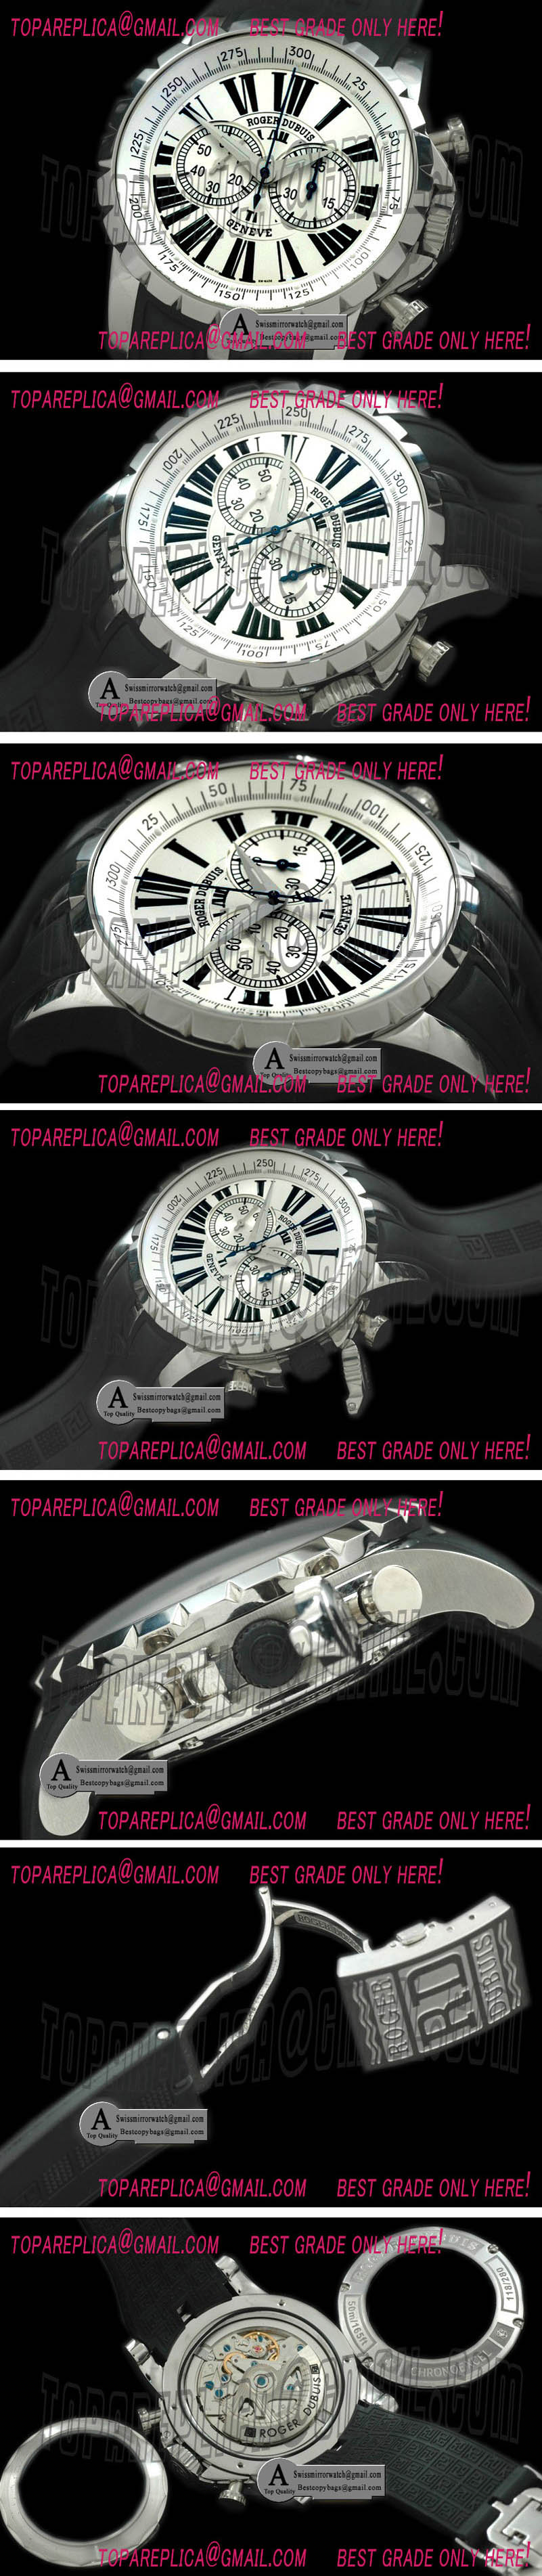 Roger Dubuis Chronoexcel 1 : 1 COMING SOON!!!! Replica Watches